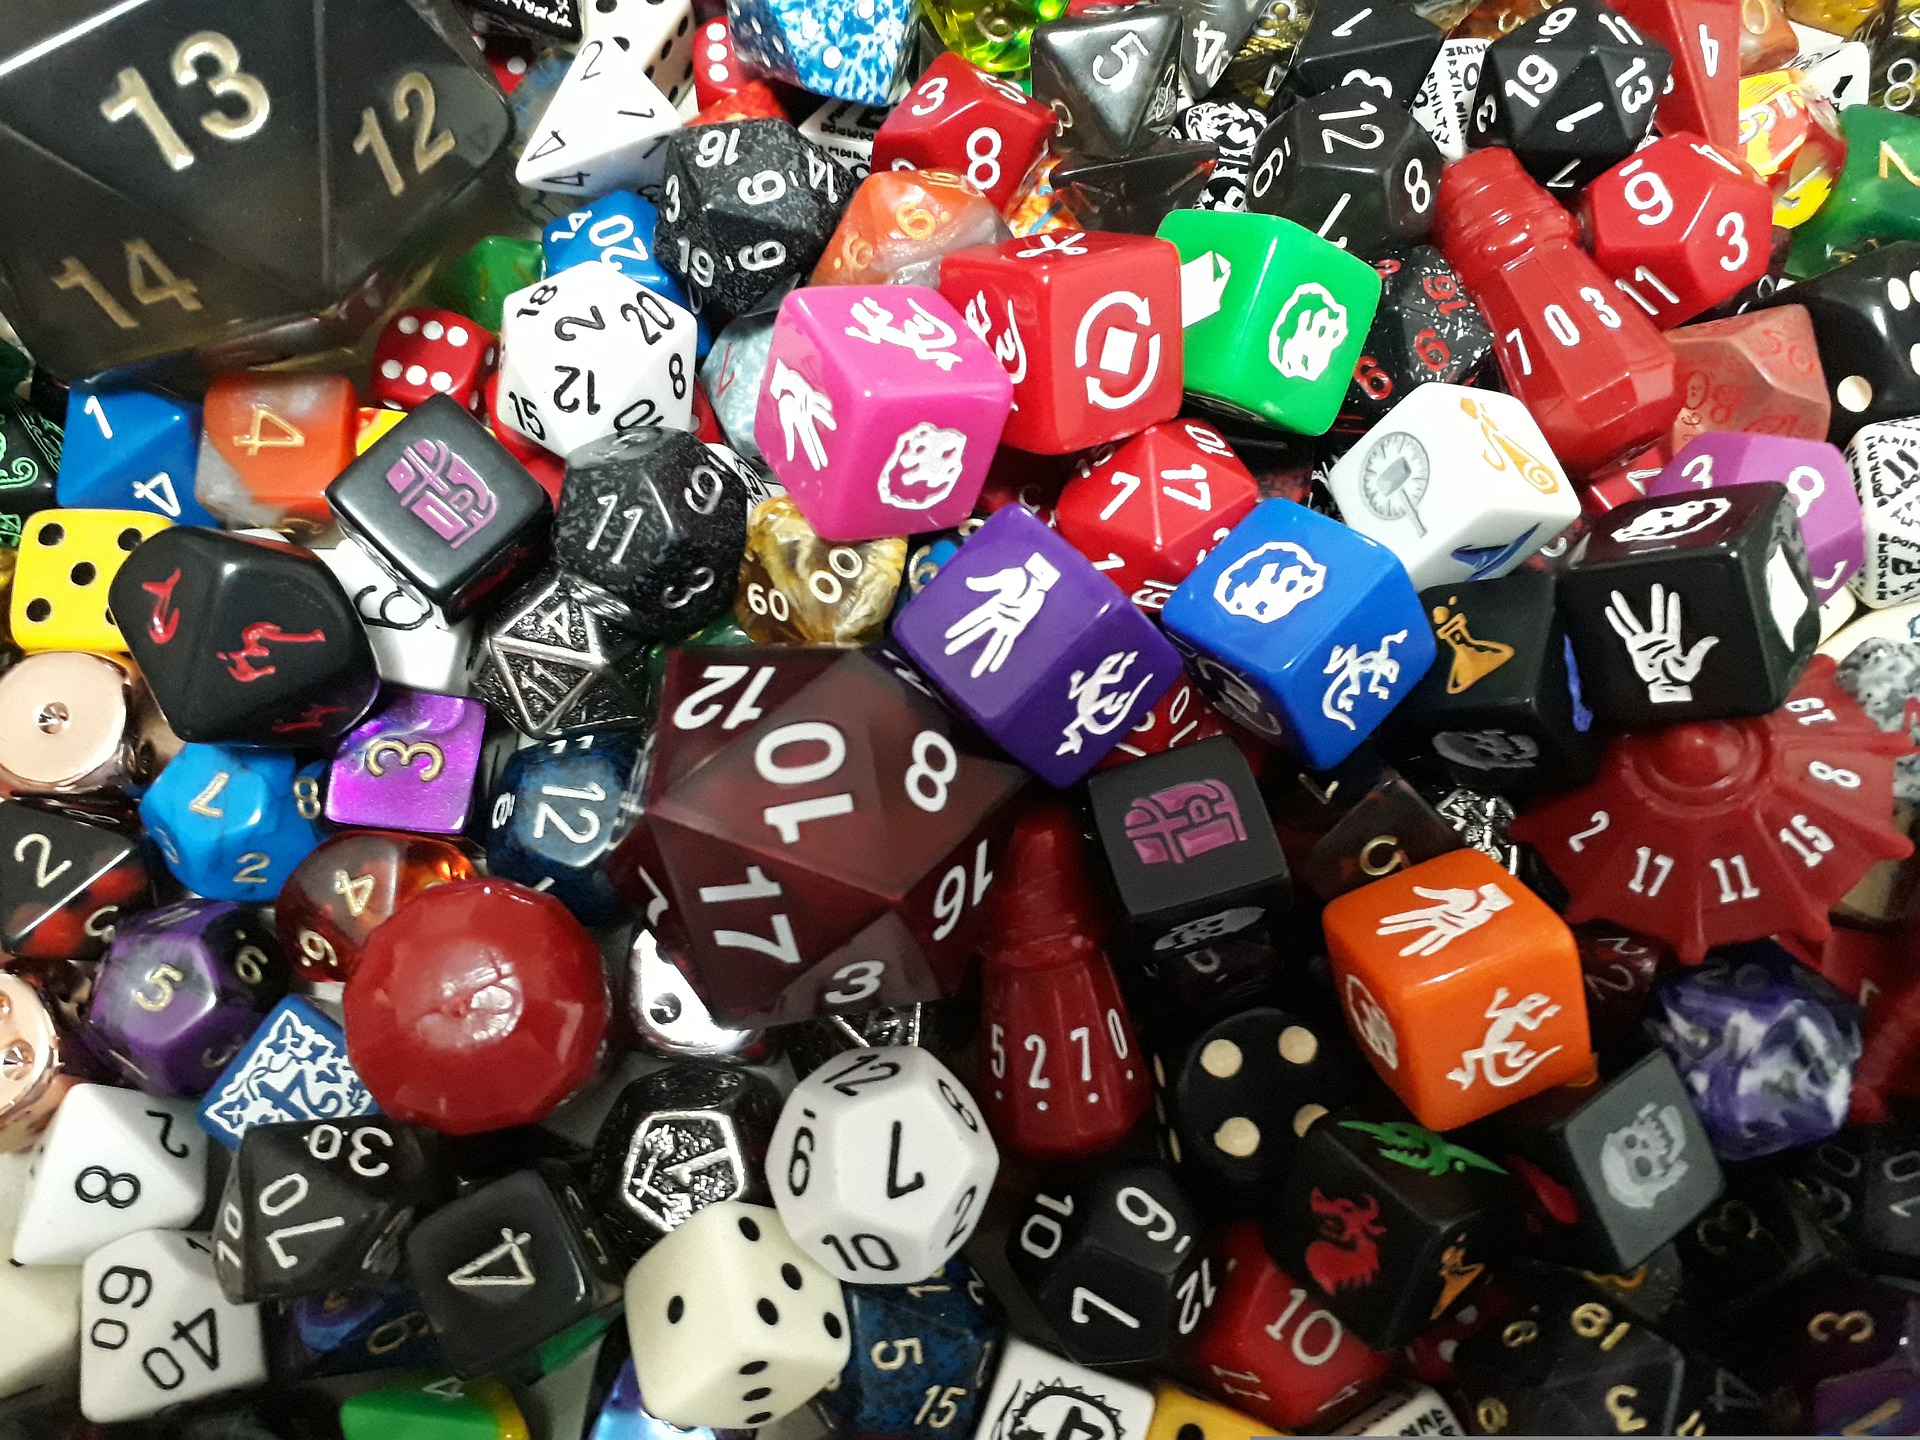 There's no such thing as 'enough dice'!